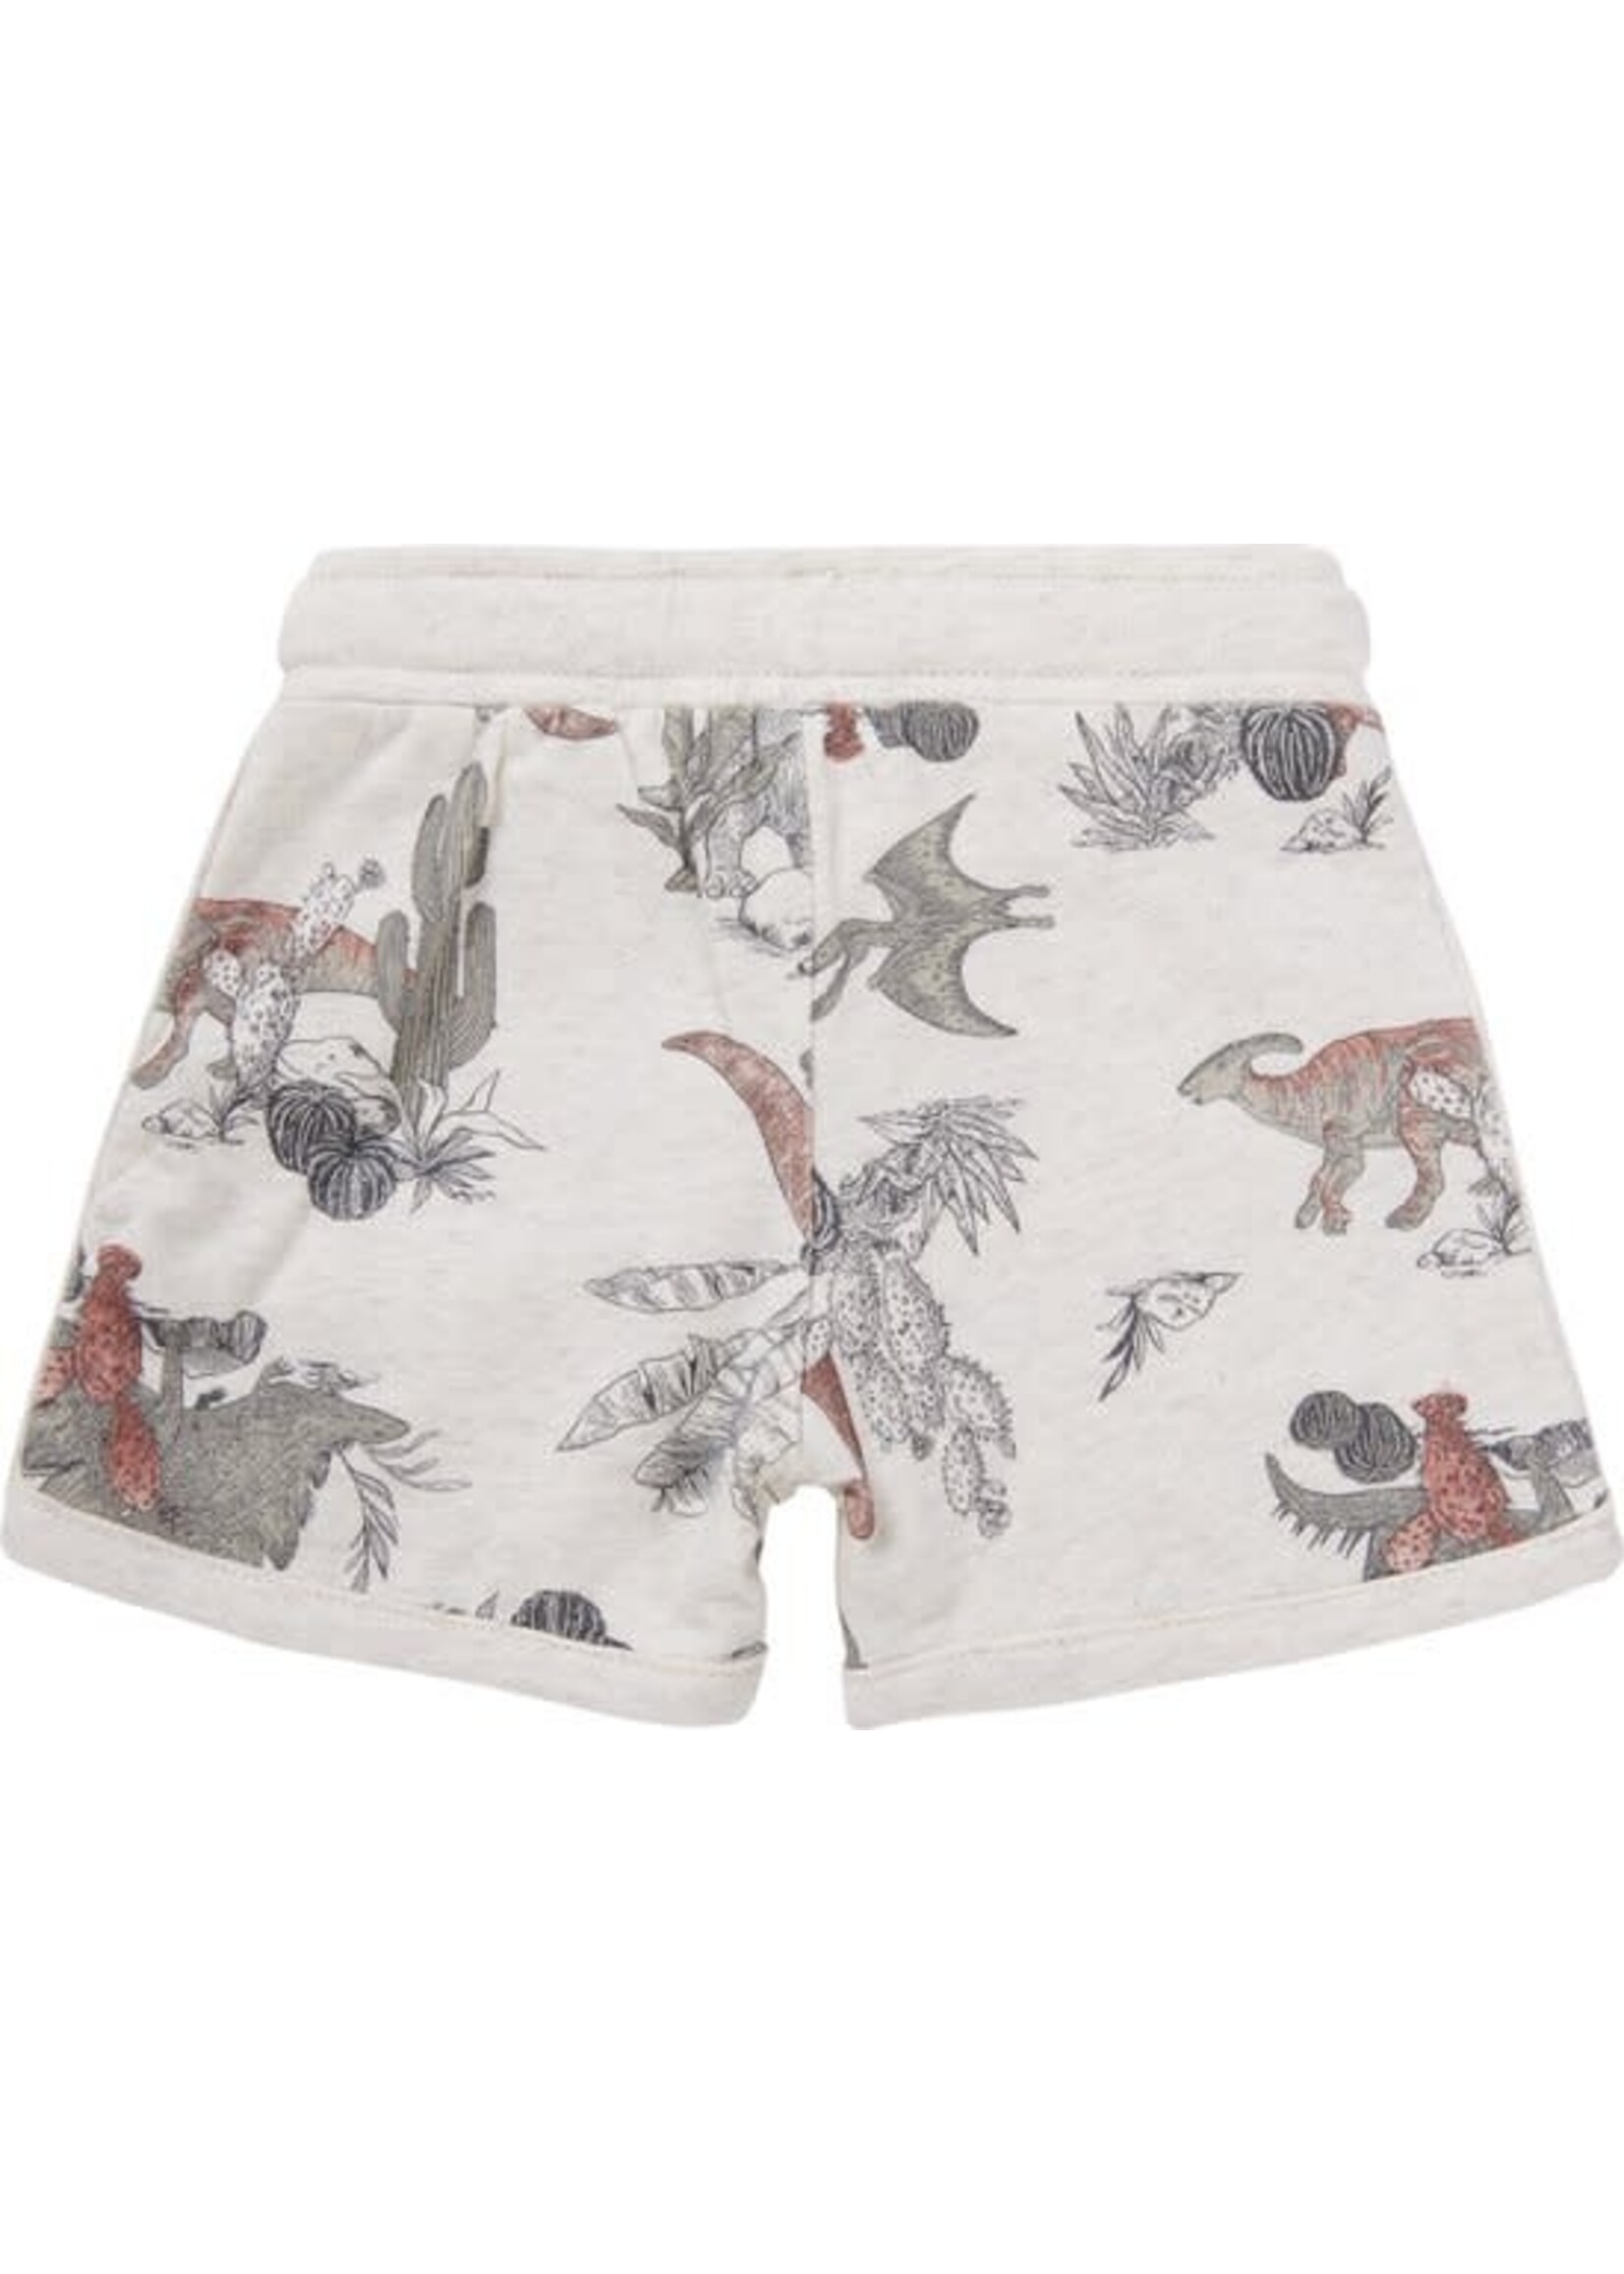 Noppies Noppies-Boys Short Moville all over print